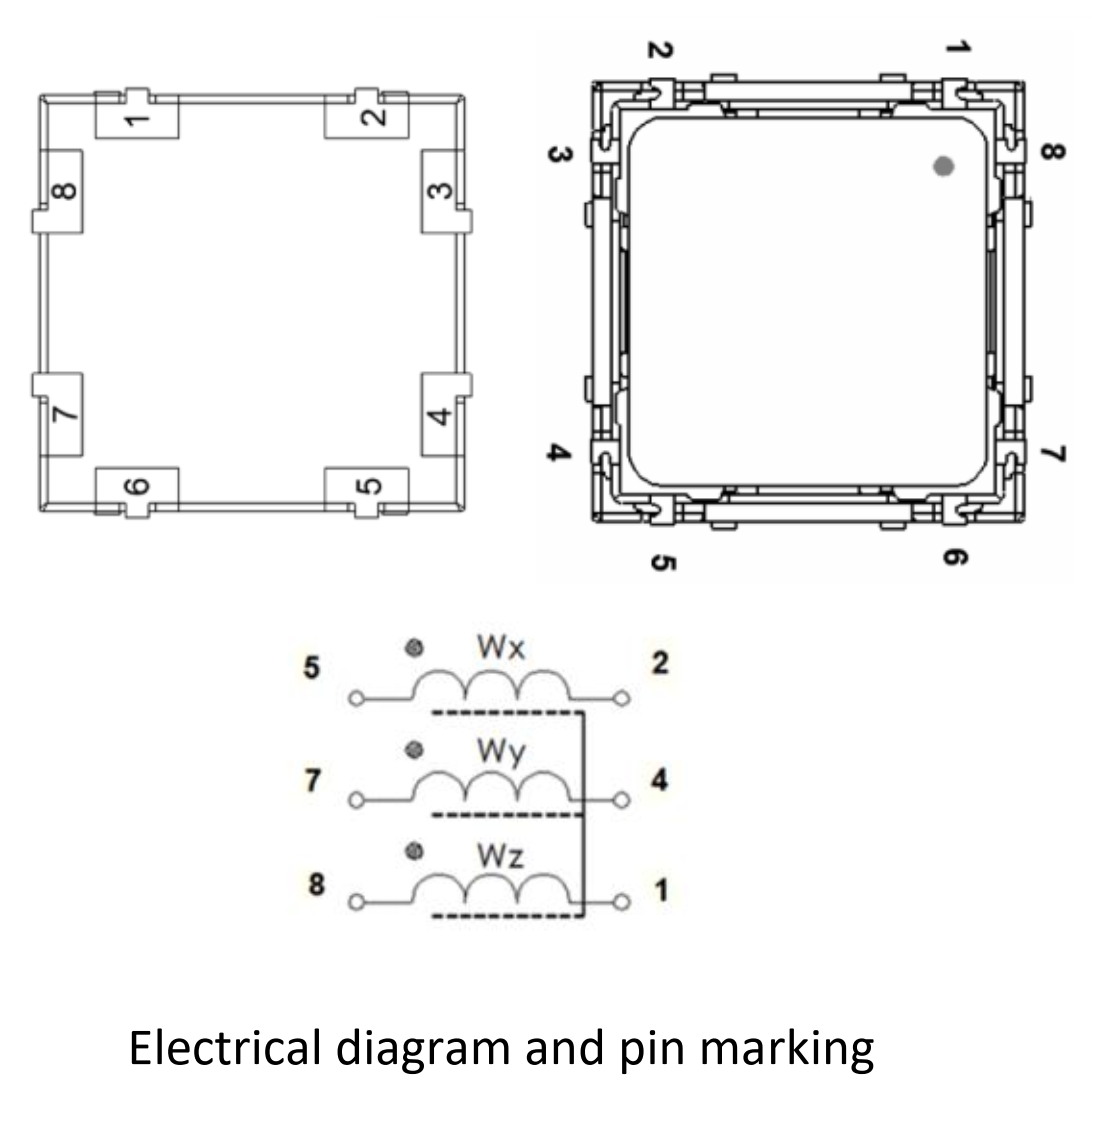 3DC13S electrical diagram